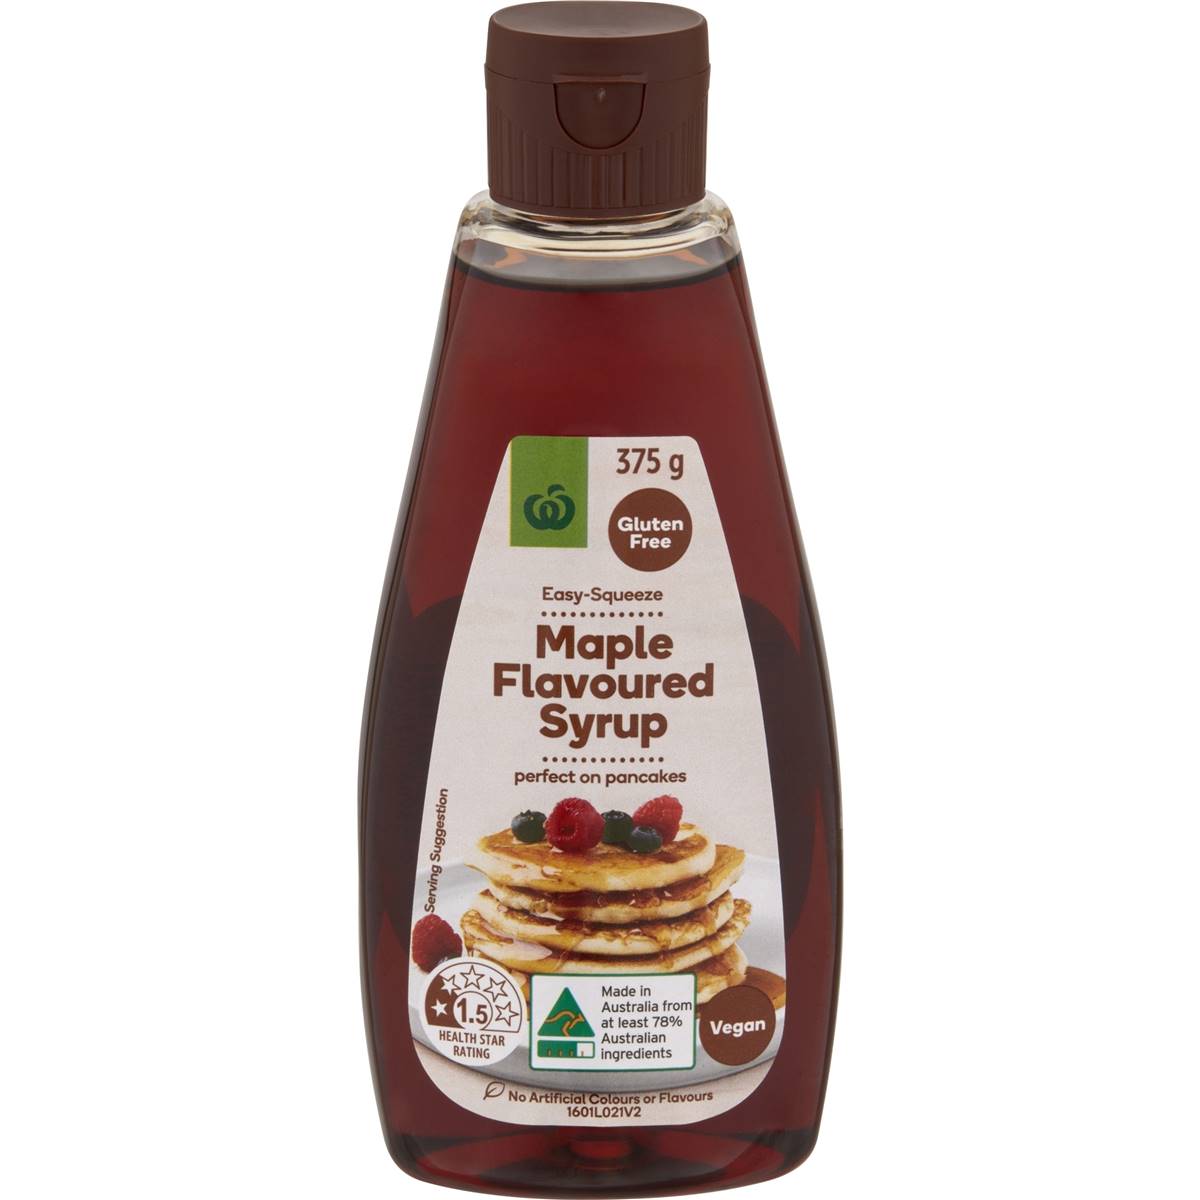 Calories in Woolworths Maple Flavoured Syrup